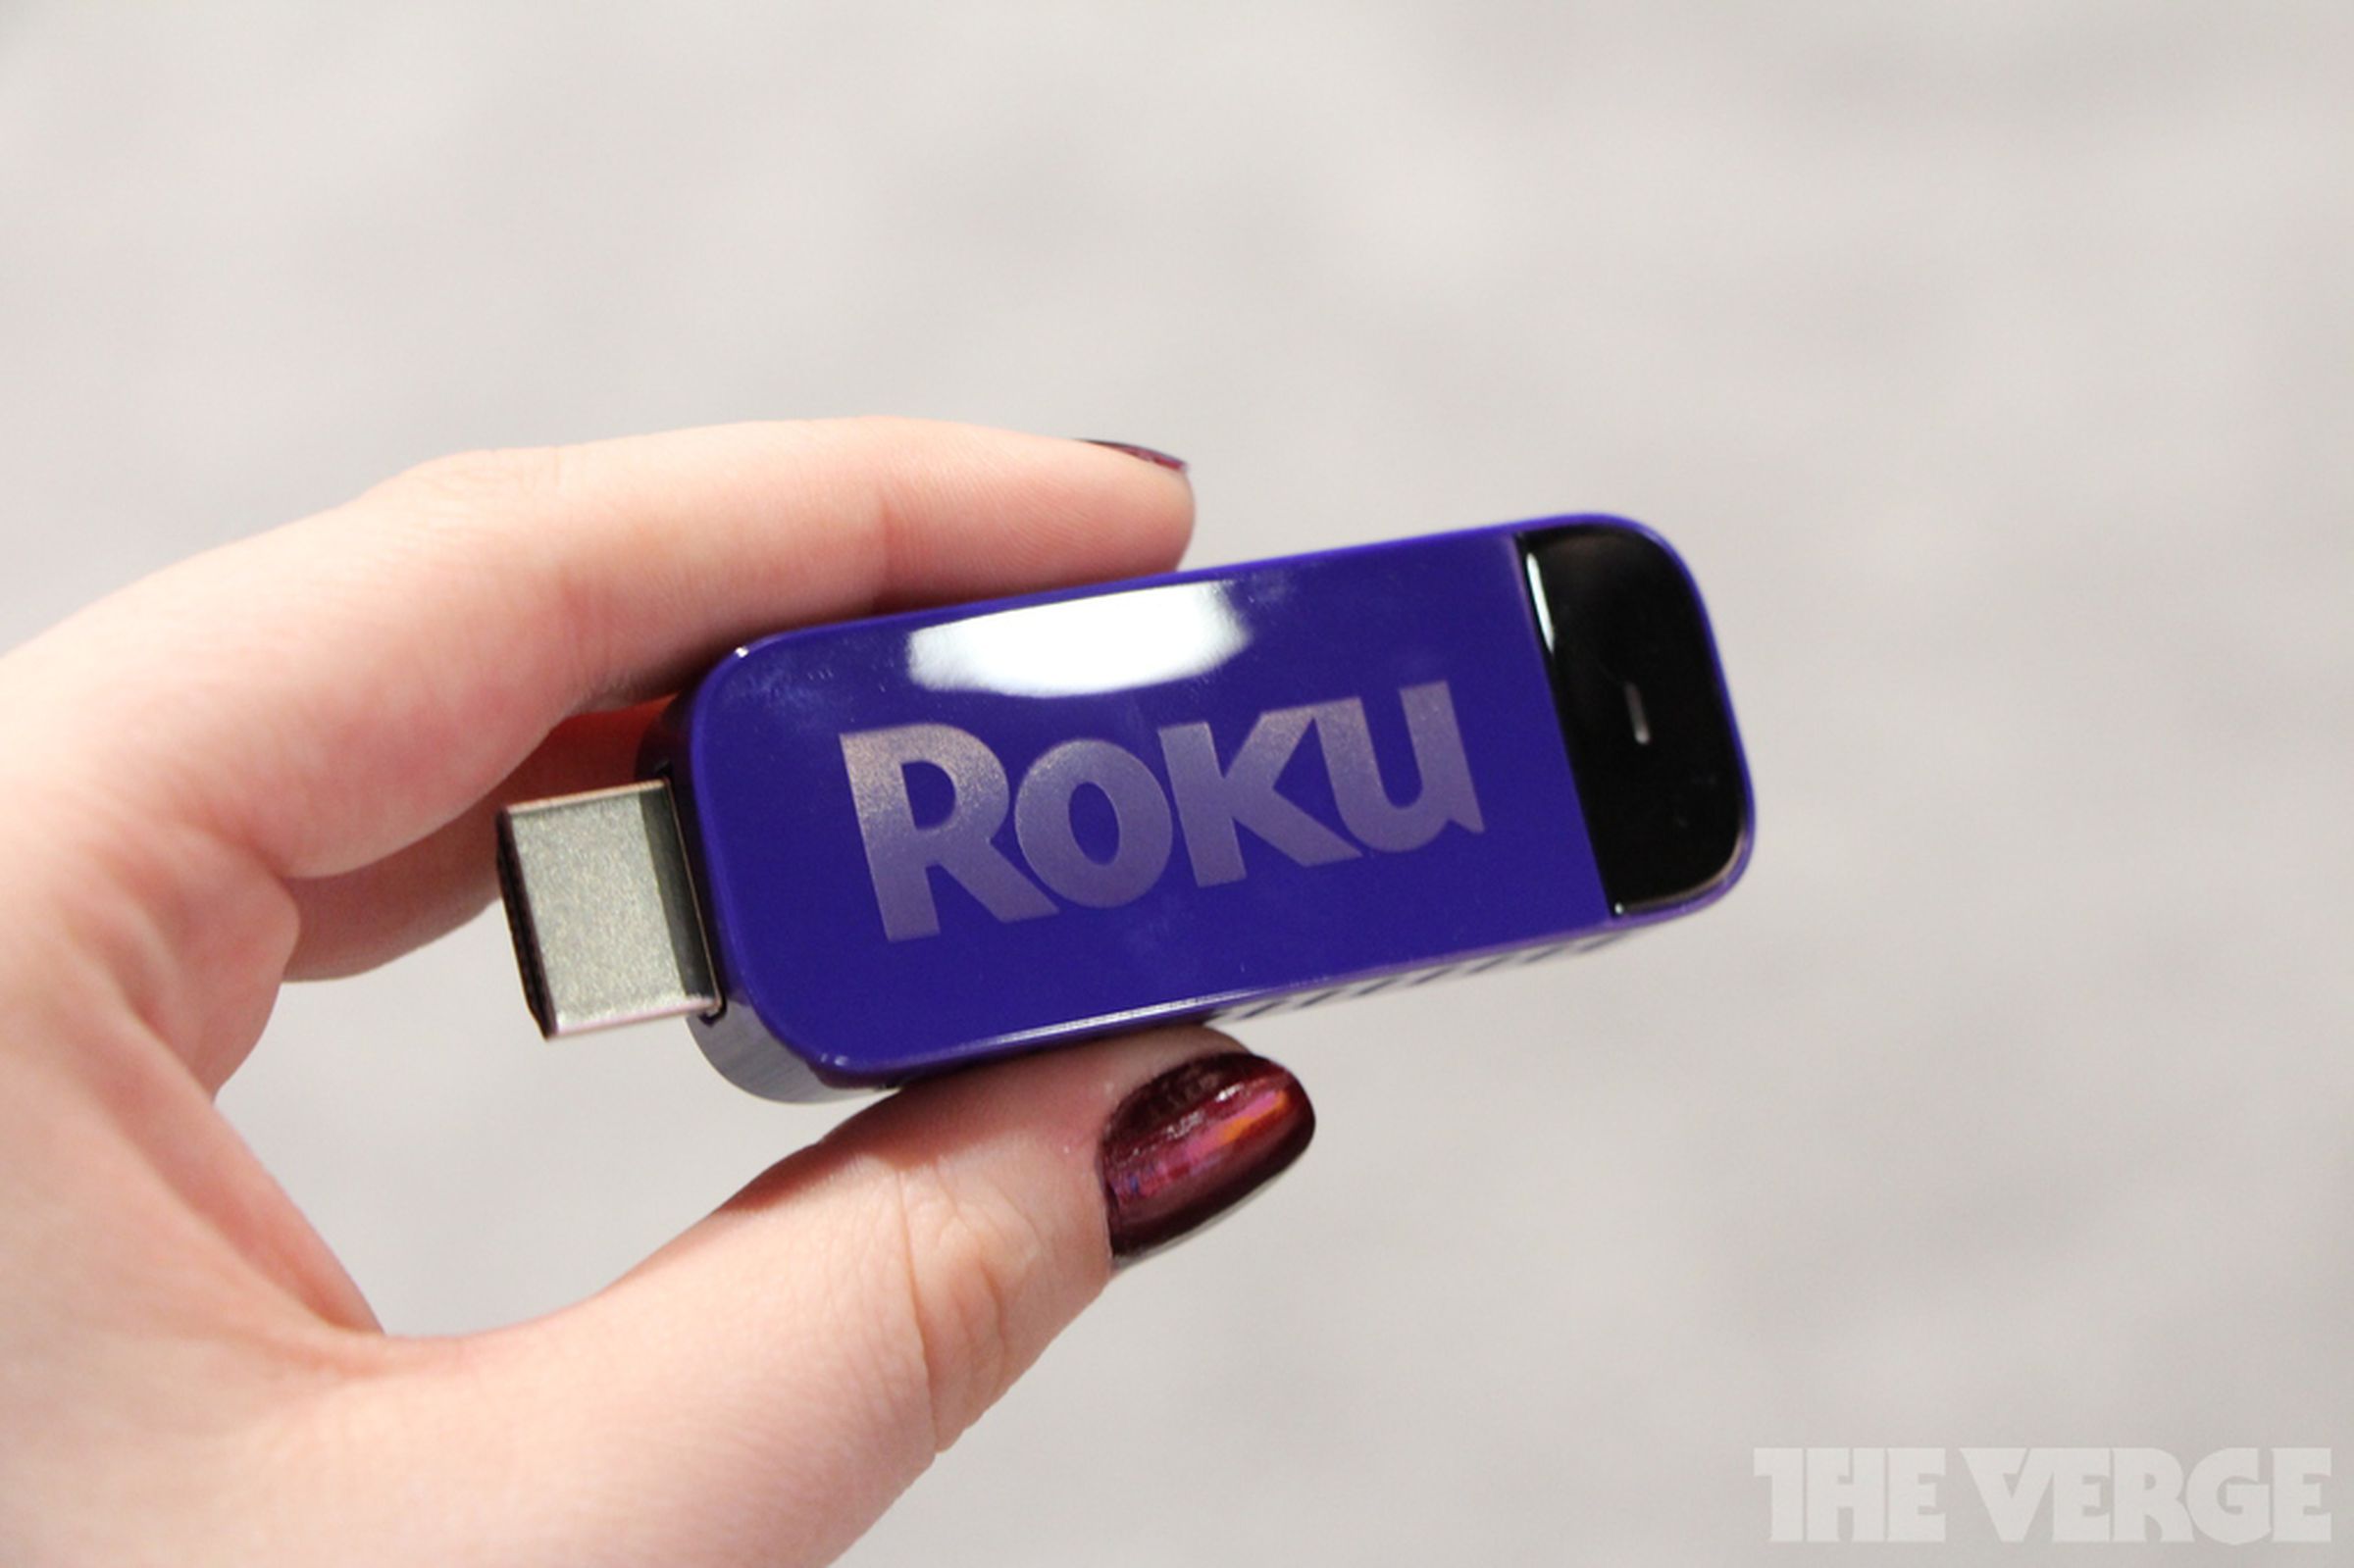 Roku Streaming Stick paired with Haier TVs photos